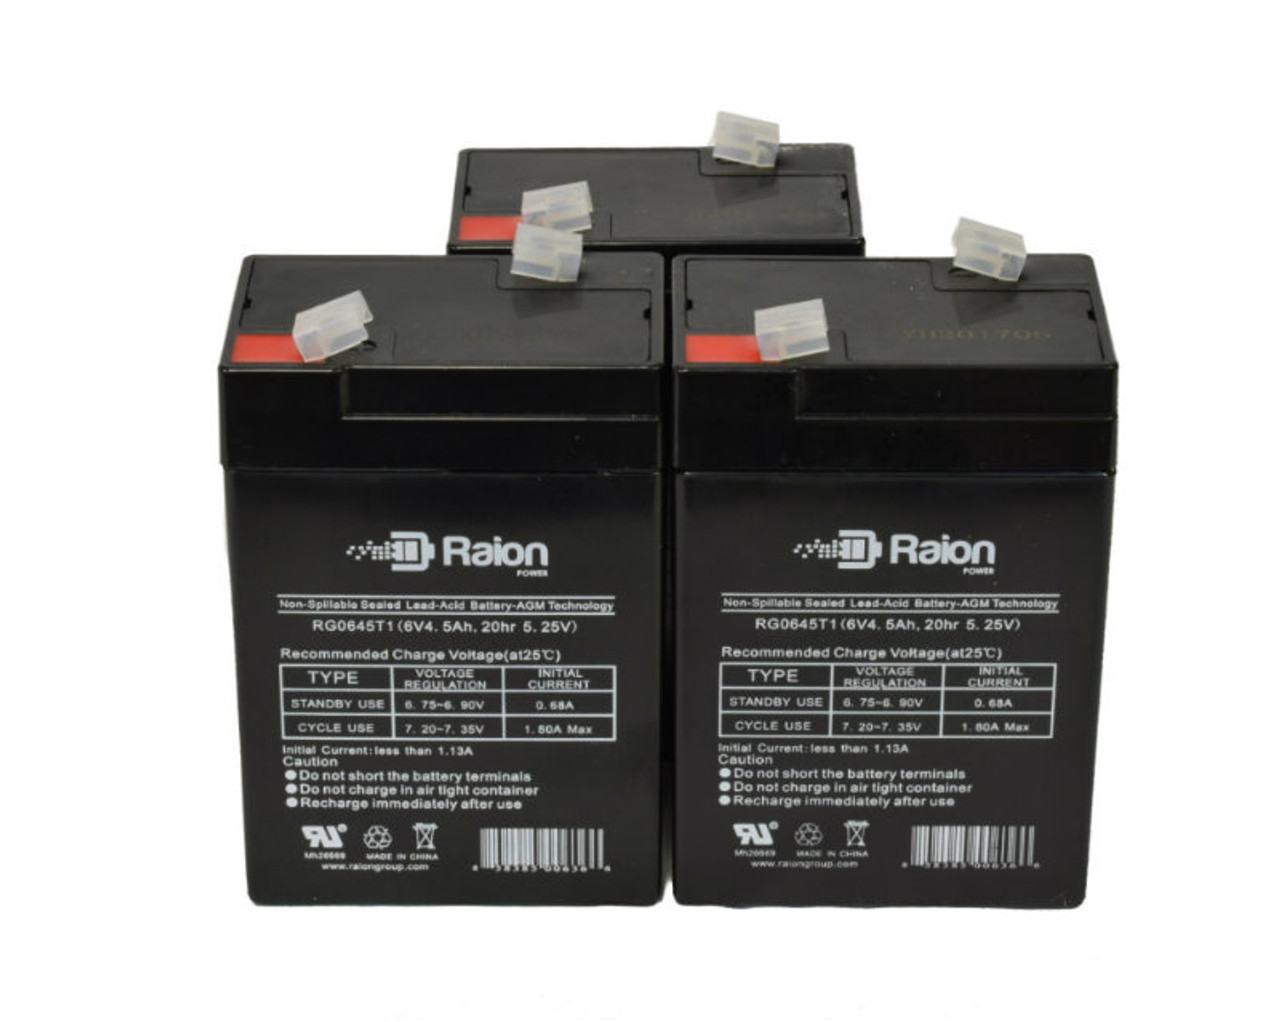 Raion Power RG0645T1 6V 4.5Ah Replacement Medical Equipment Battery for Ohio 504Us Pulse Oximeter - 3 Pack